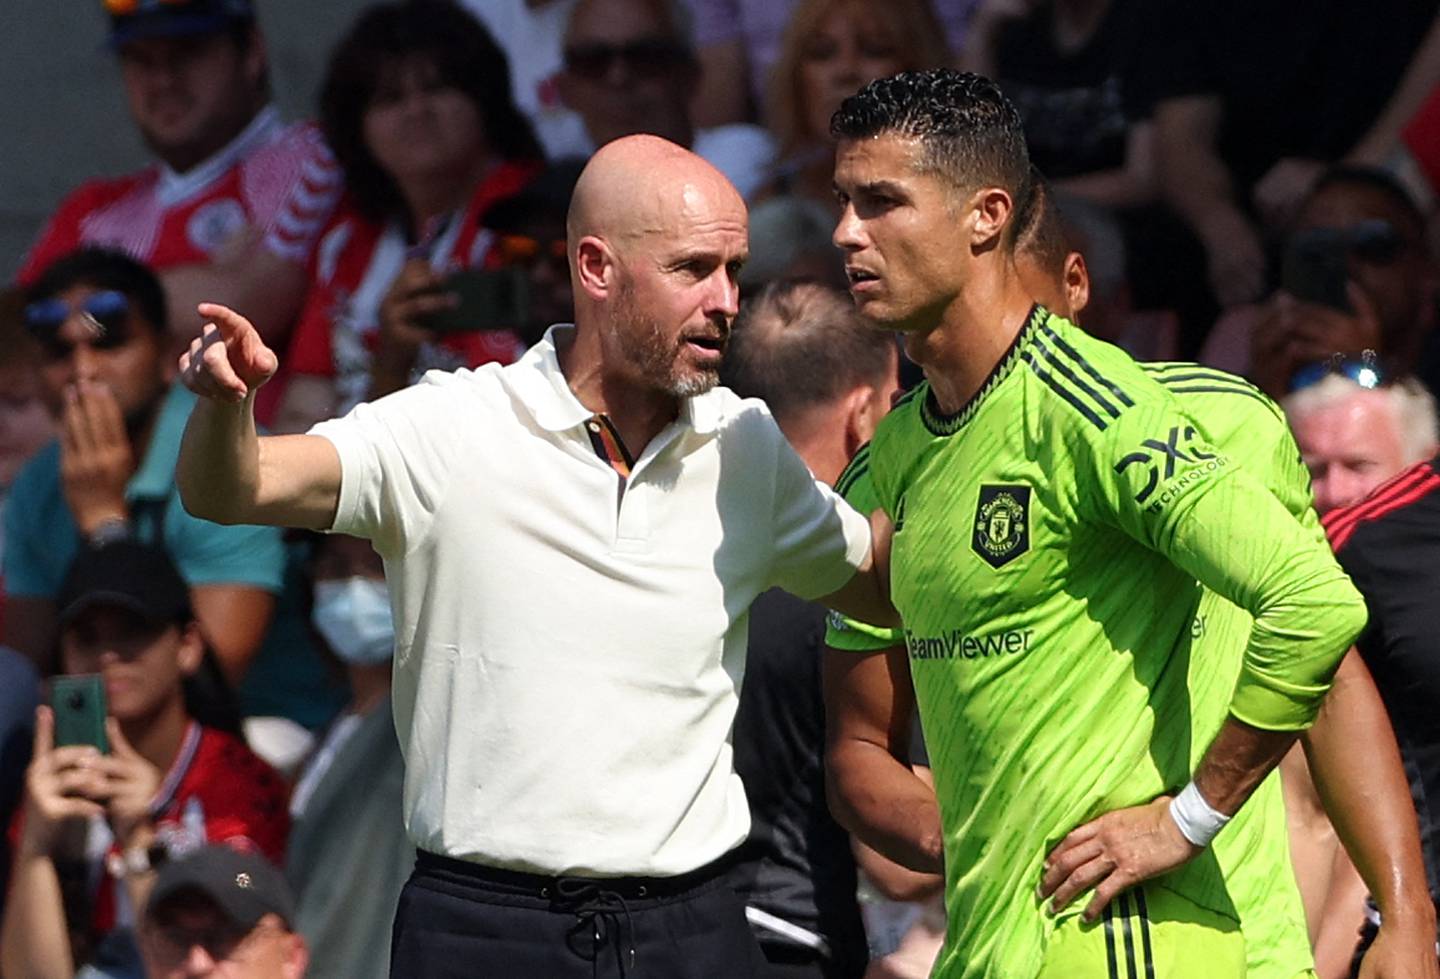 Manchester United manager Erik ten Hag speaks to Cristiano Ronaldo before his introduction as substitute against Southampton. AFP